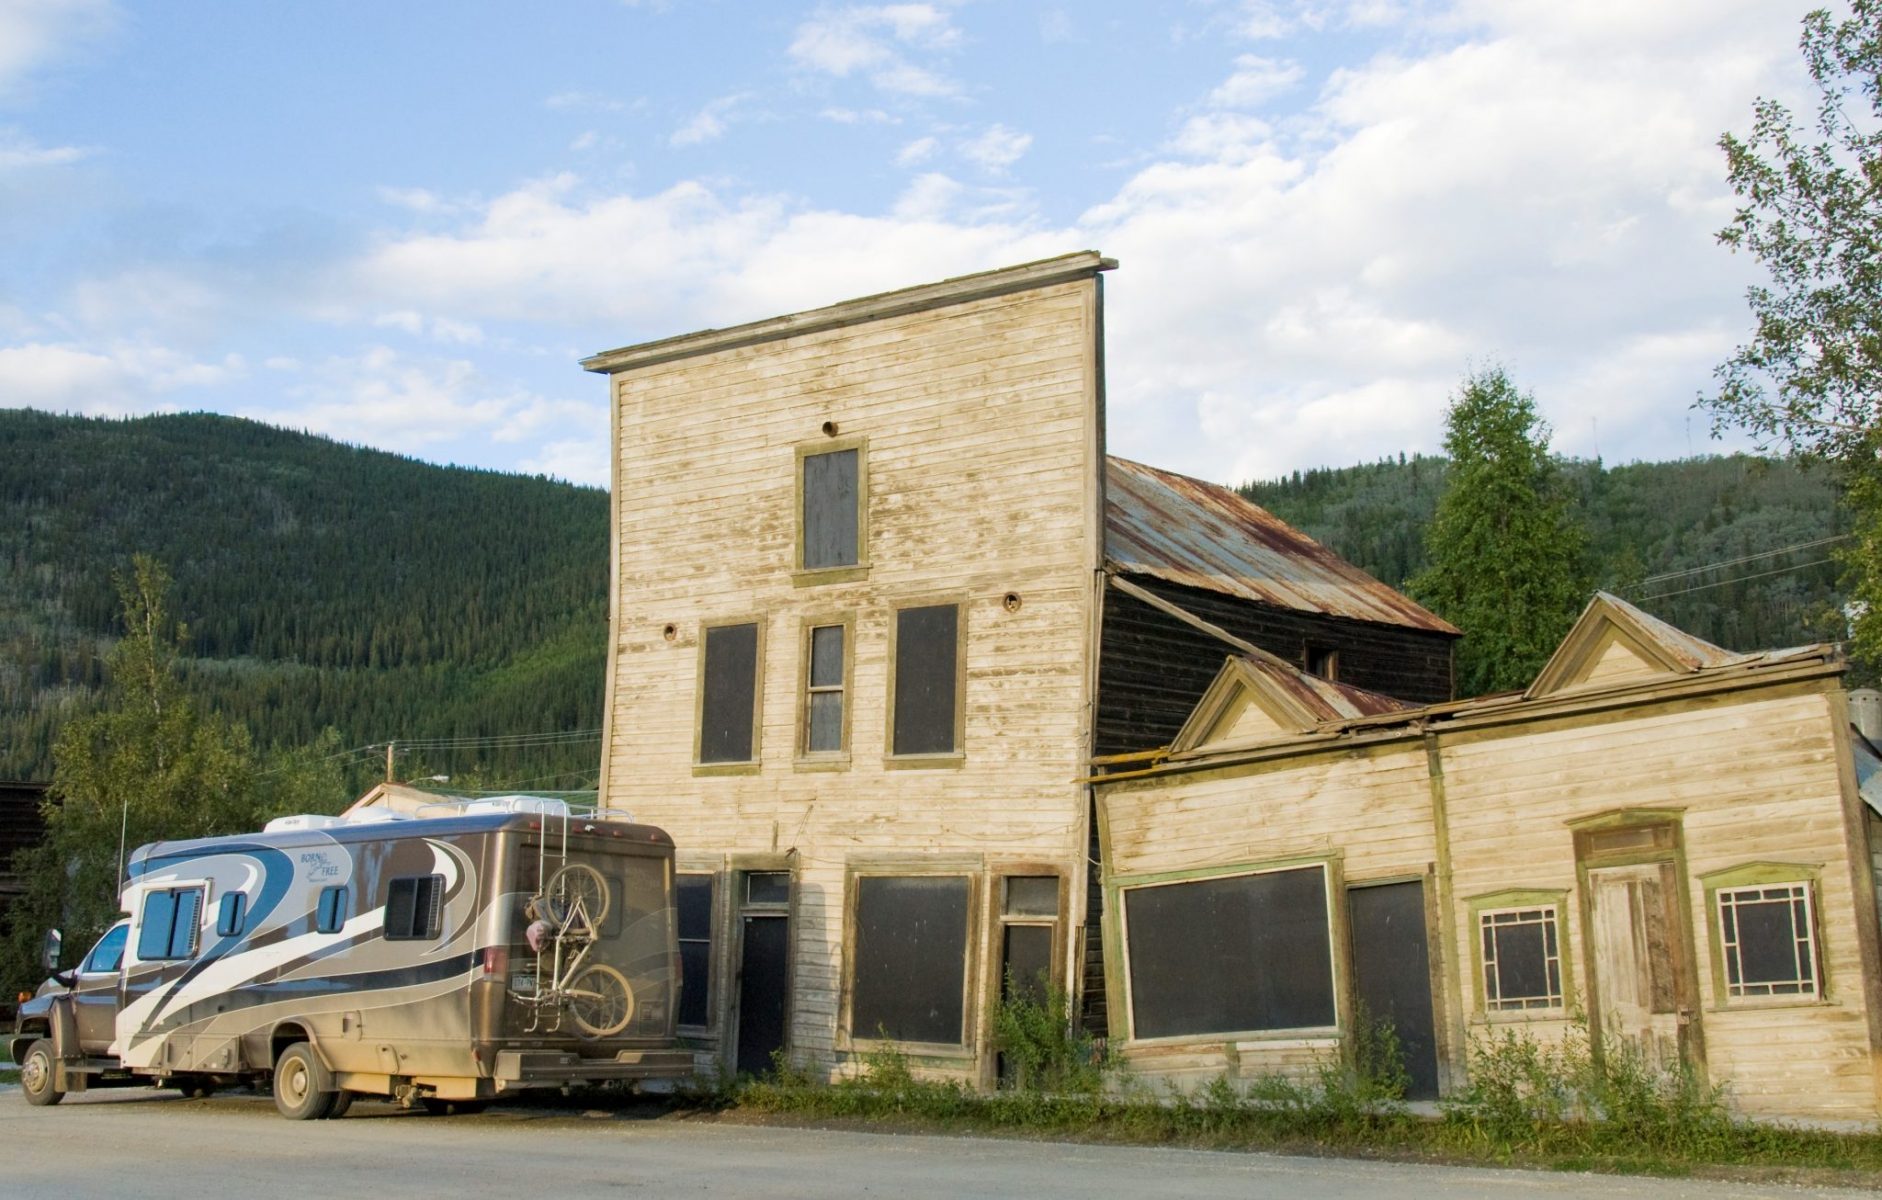 Looking at old buildings is one of the best things to do in Dawson City, here three brown buildings from the late 1890s are boarded up and leaning over slightly. In front of the buildings is a motorhome covered in mud